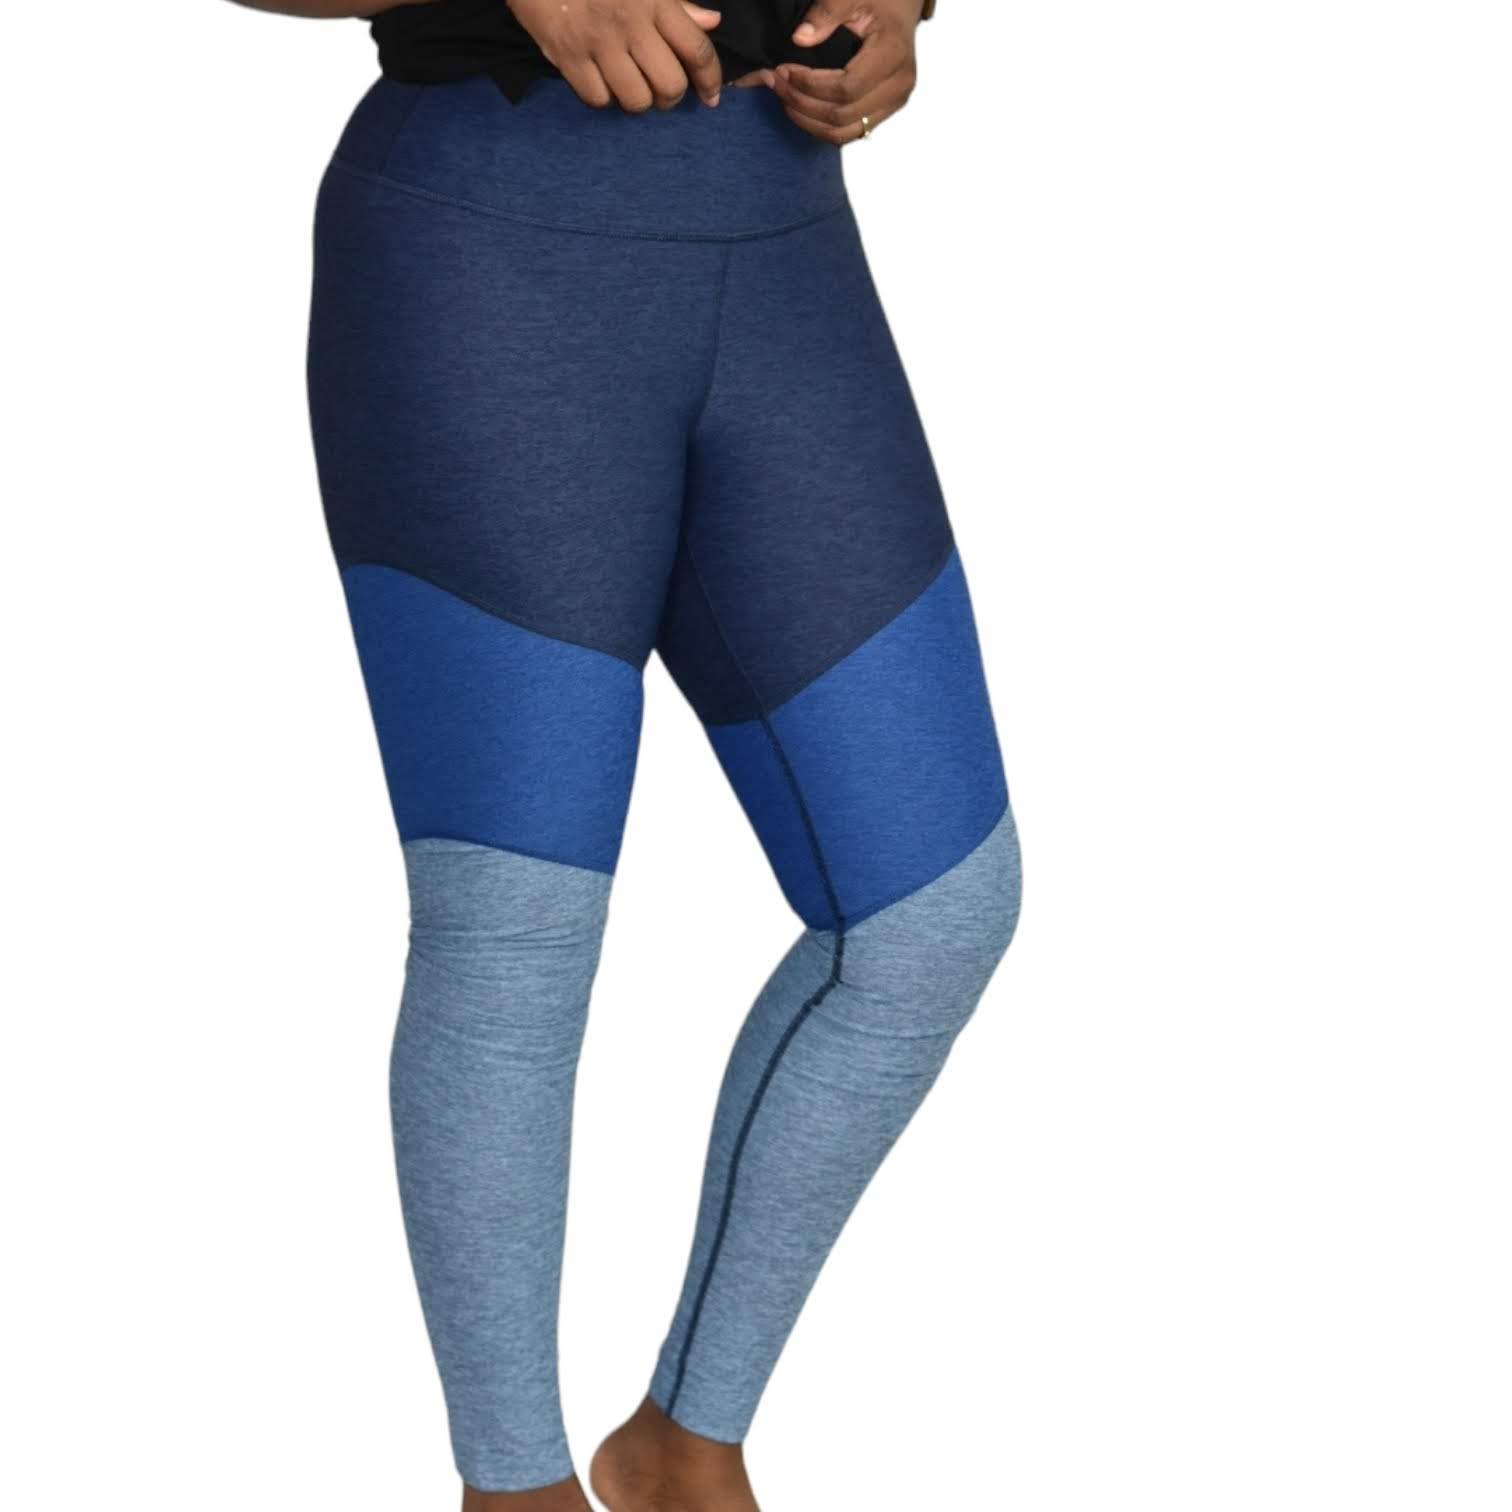 Outdoor Voices Springs Leggings Calf Length Blue Compression Casual Size XS